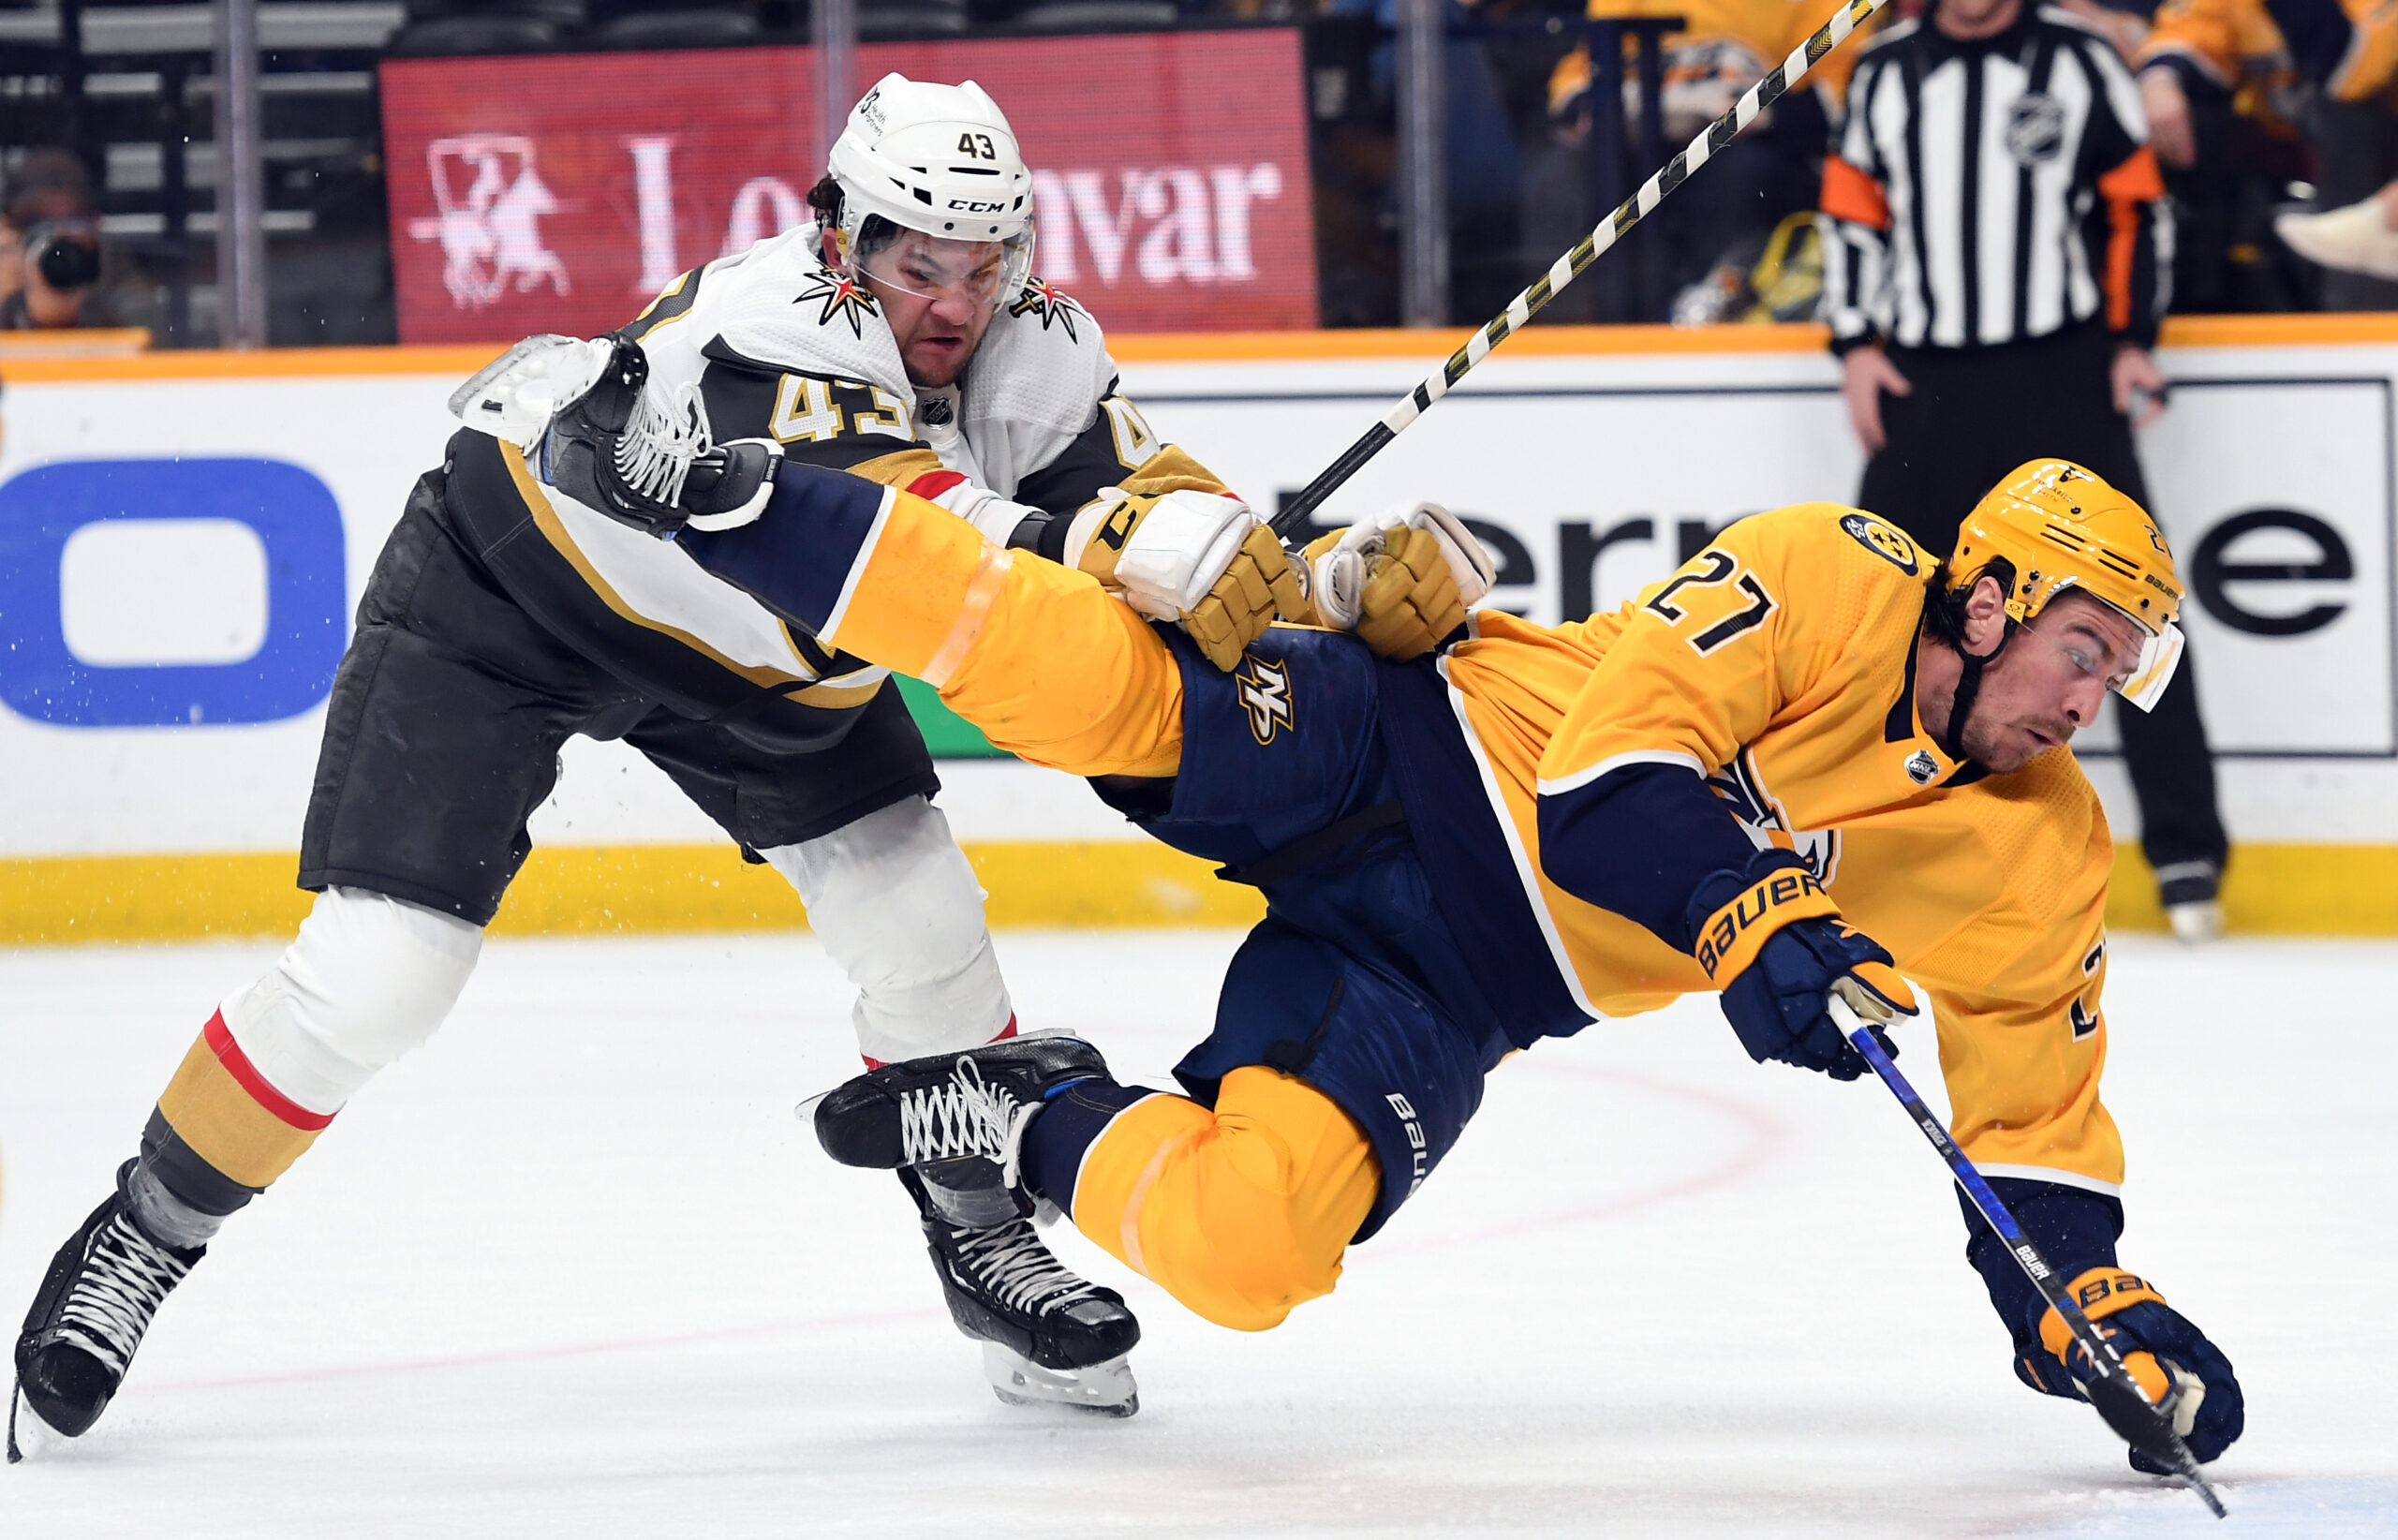 Vegas Golden Knights vs. Nashville Predators, live stream, TV channel, time, how to watch the NHL